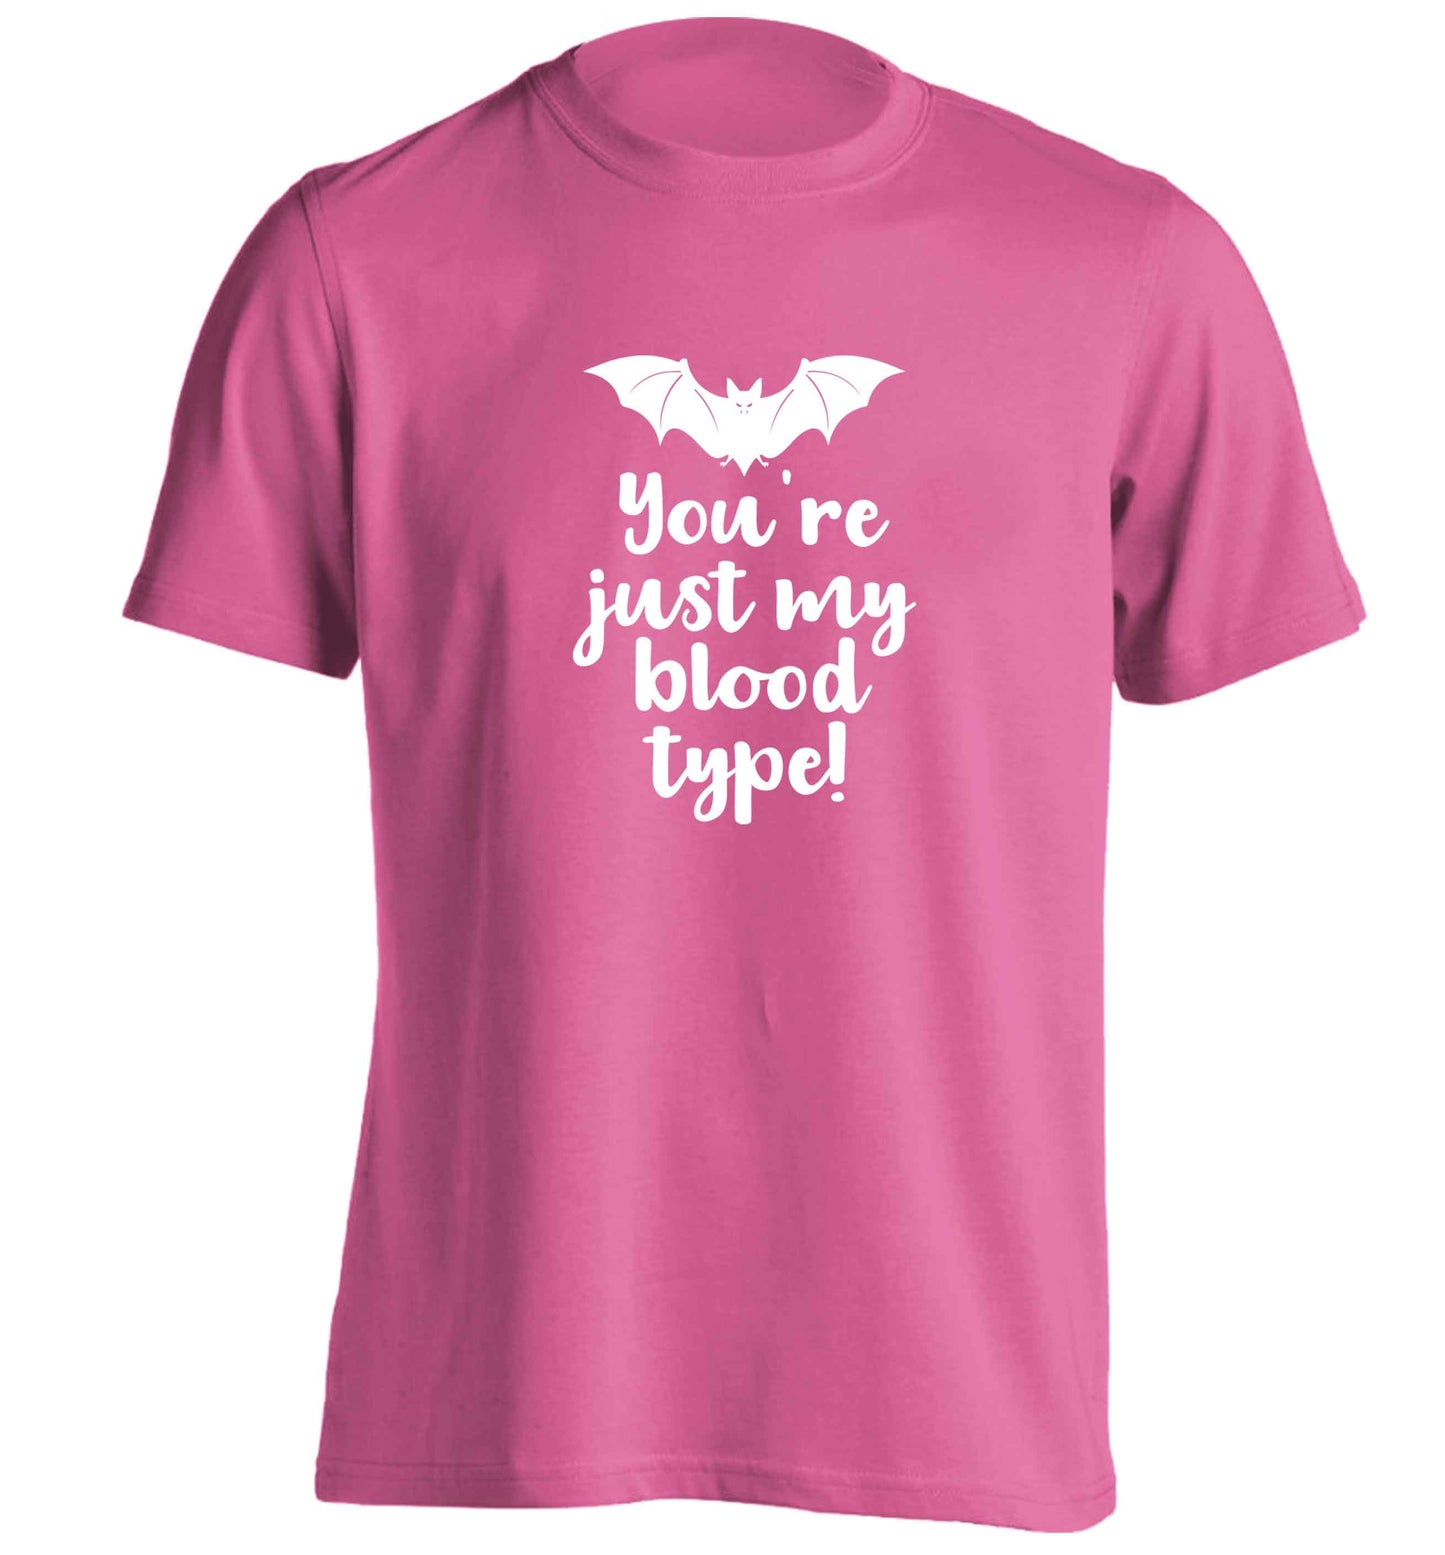 You're just my blood type adults unisex pink Tshirt 2XL